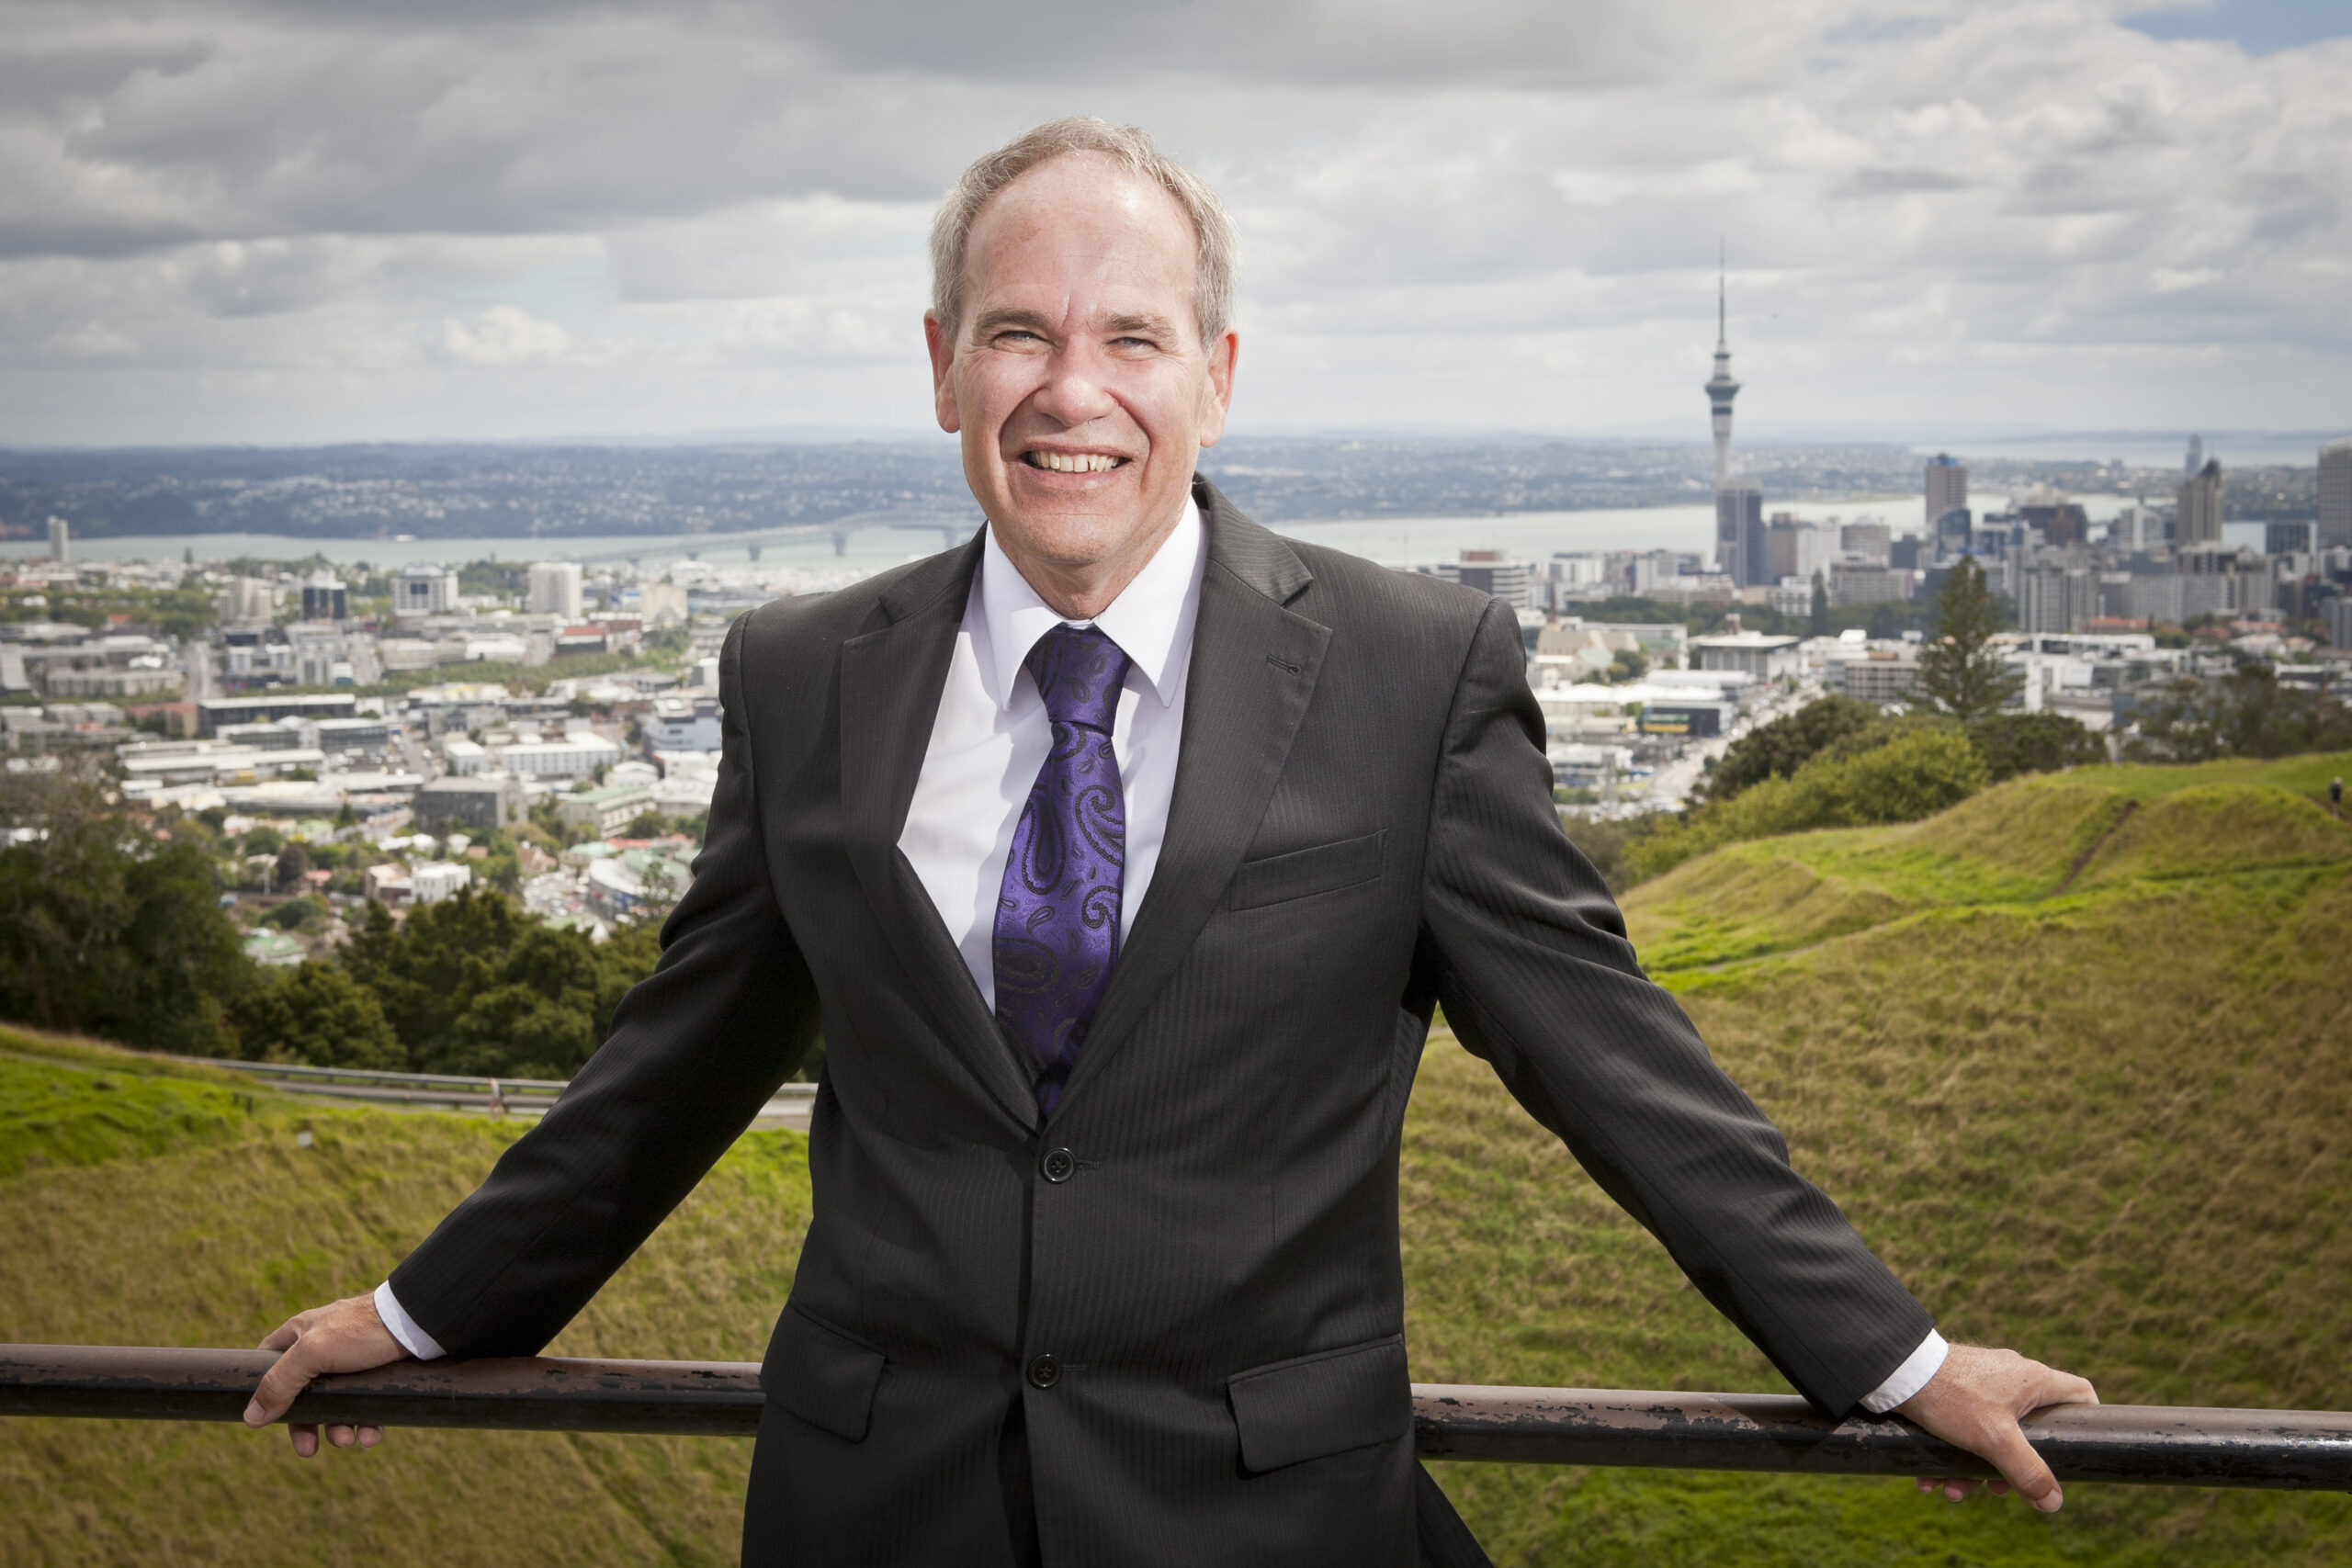 Mayor Brown with Auckland background